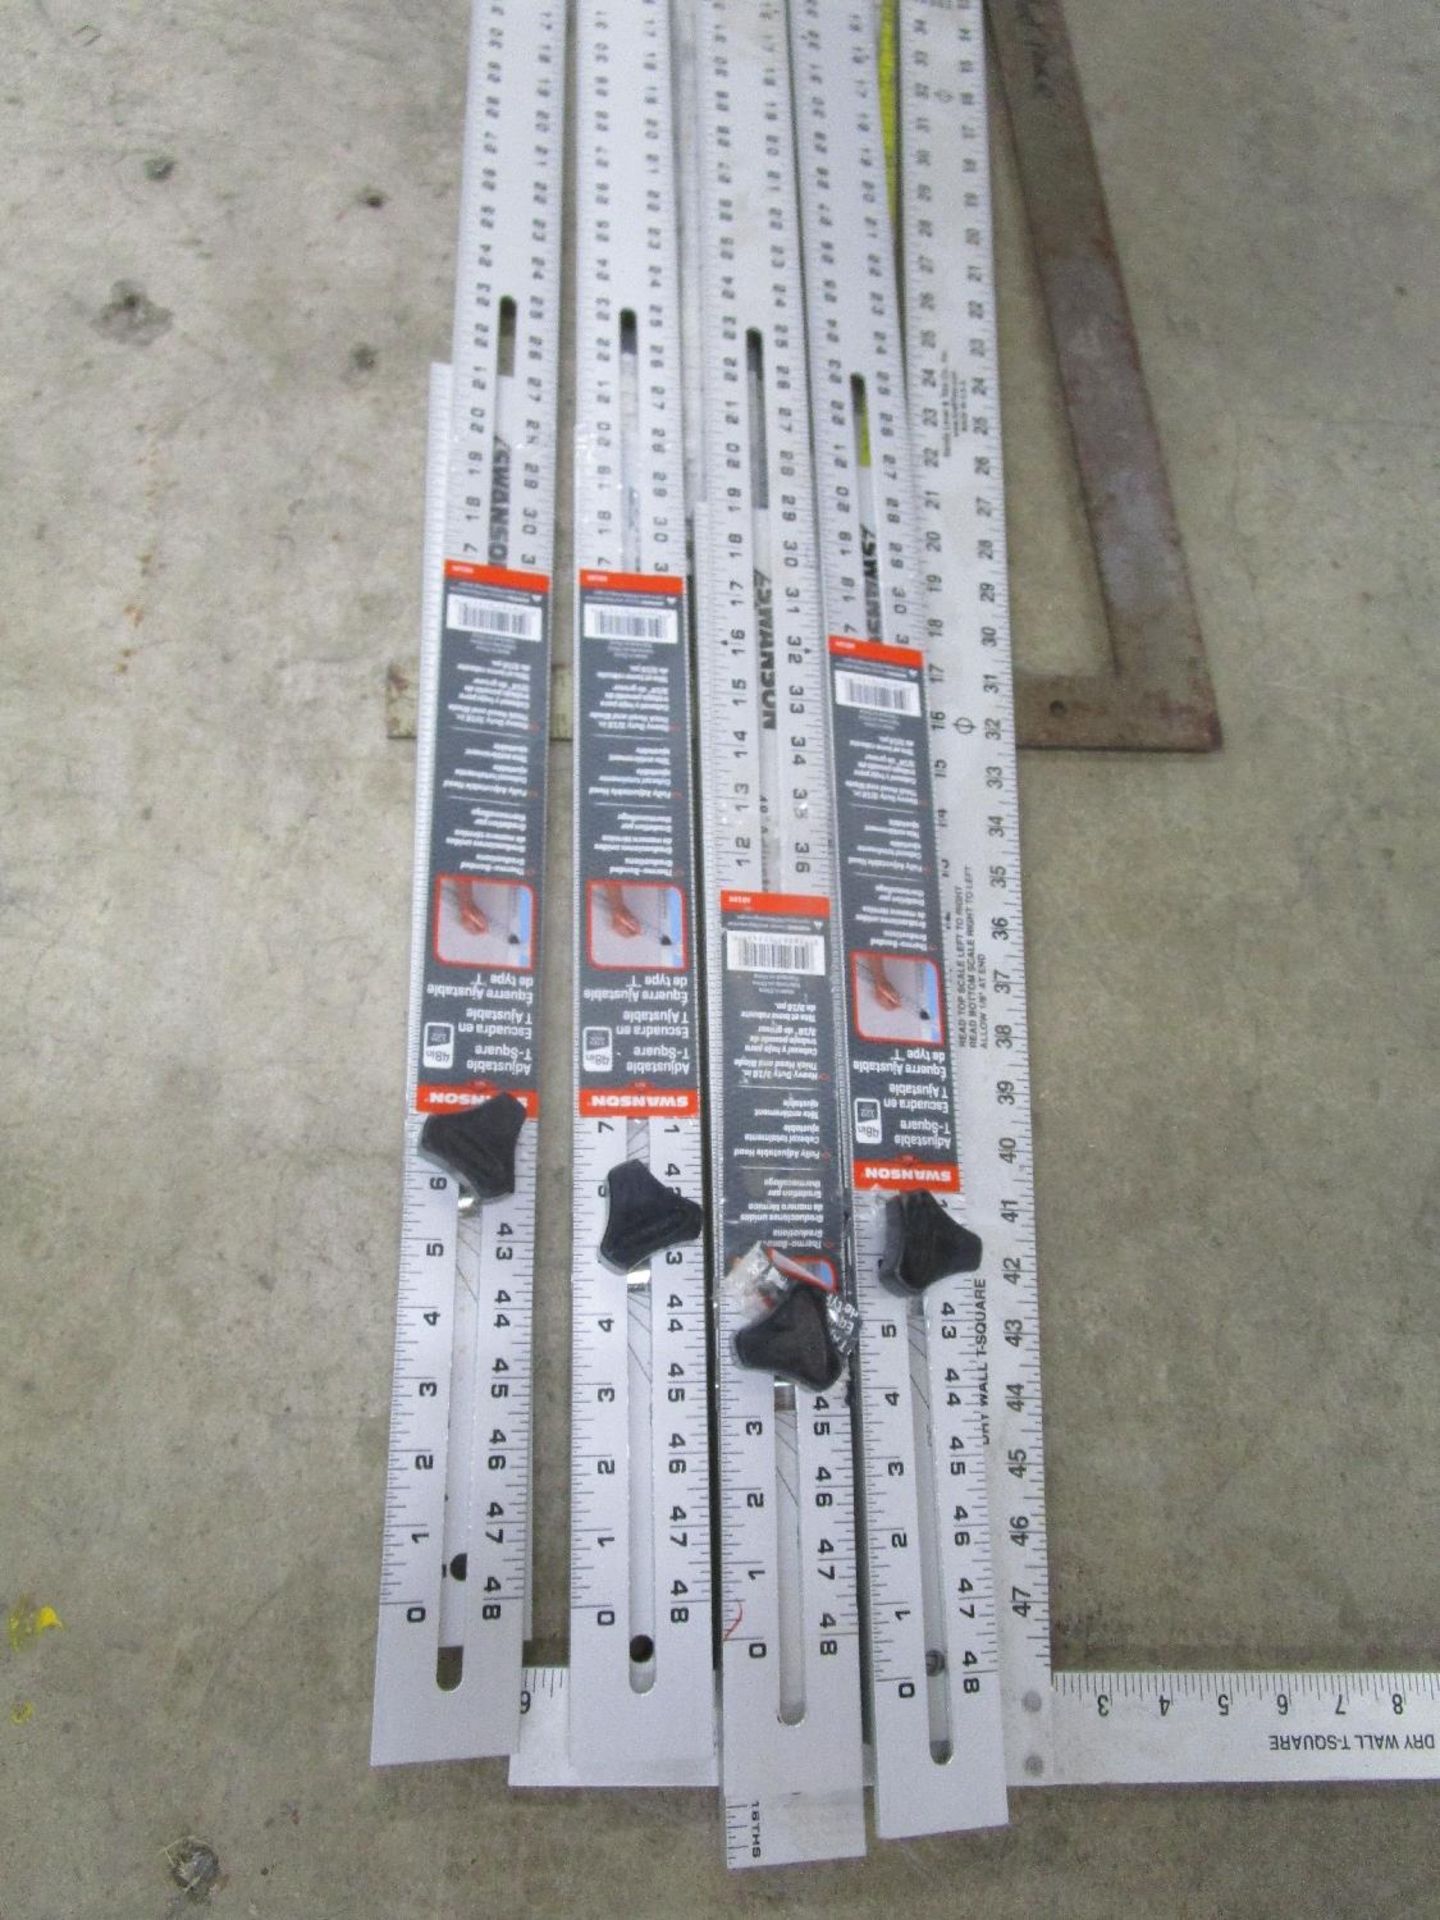 Swanson AD24 Adjustable T-Squares with Aluminum Straight Edges - Image 2 of 3